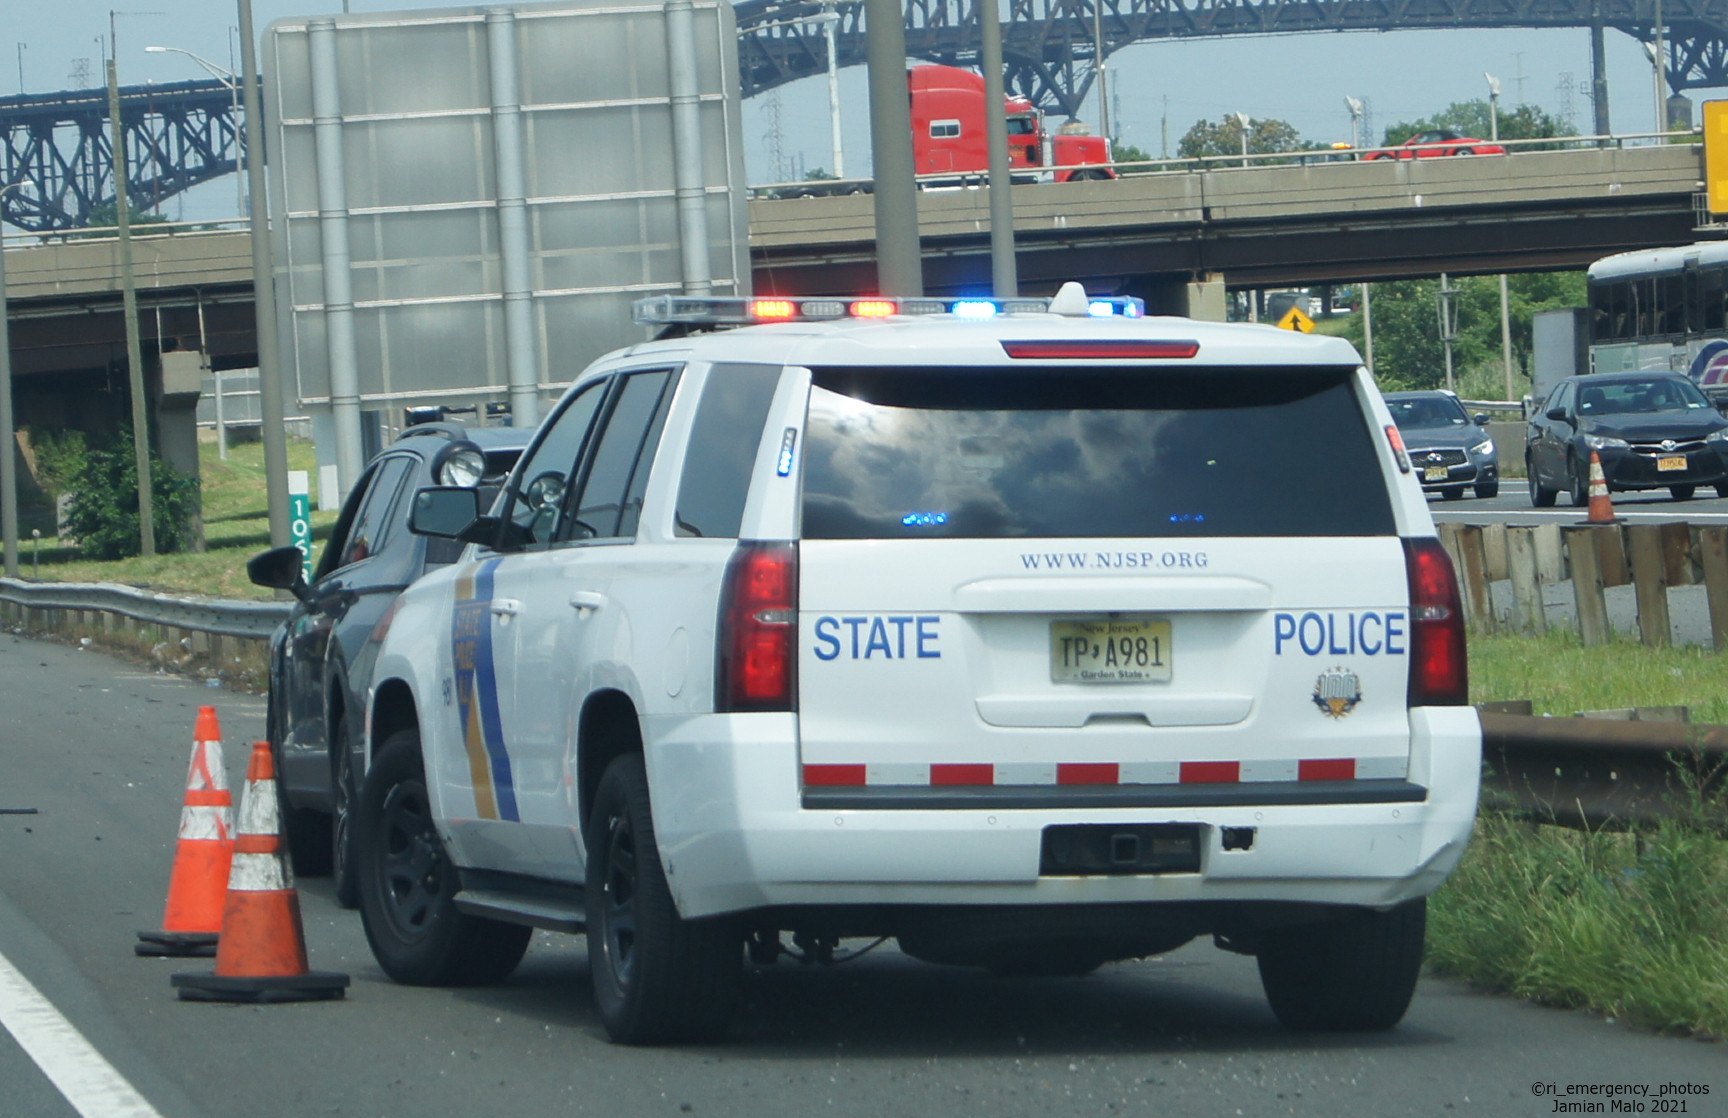 A photo  of New Jersey State Police
            Cruiser 981, a 2015-2020 Chevrolet Tahoe             taken by Jamian Malo